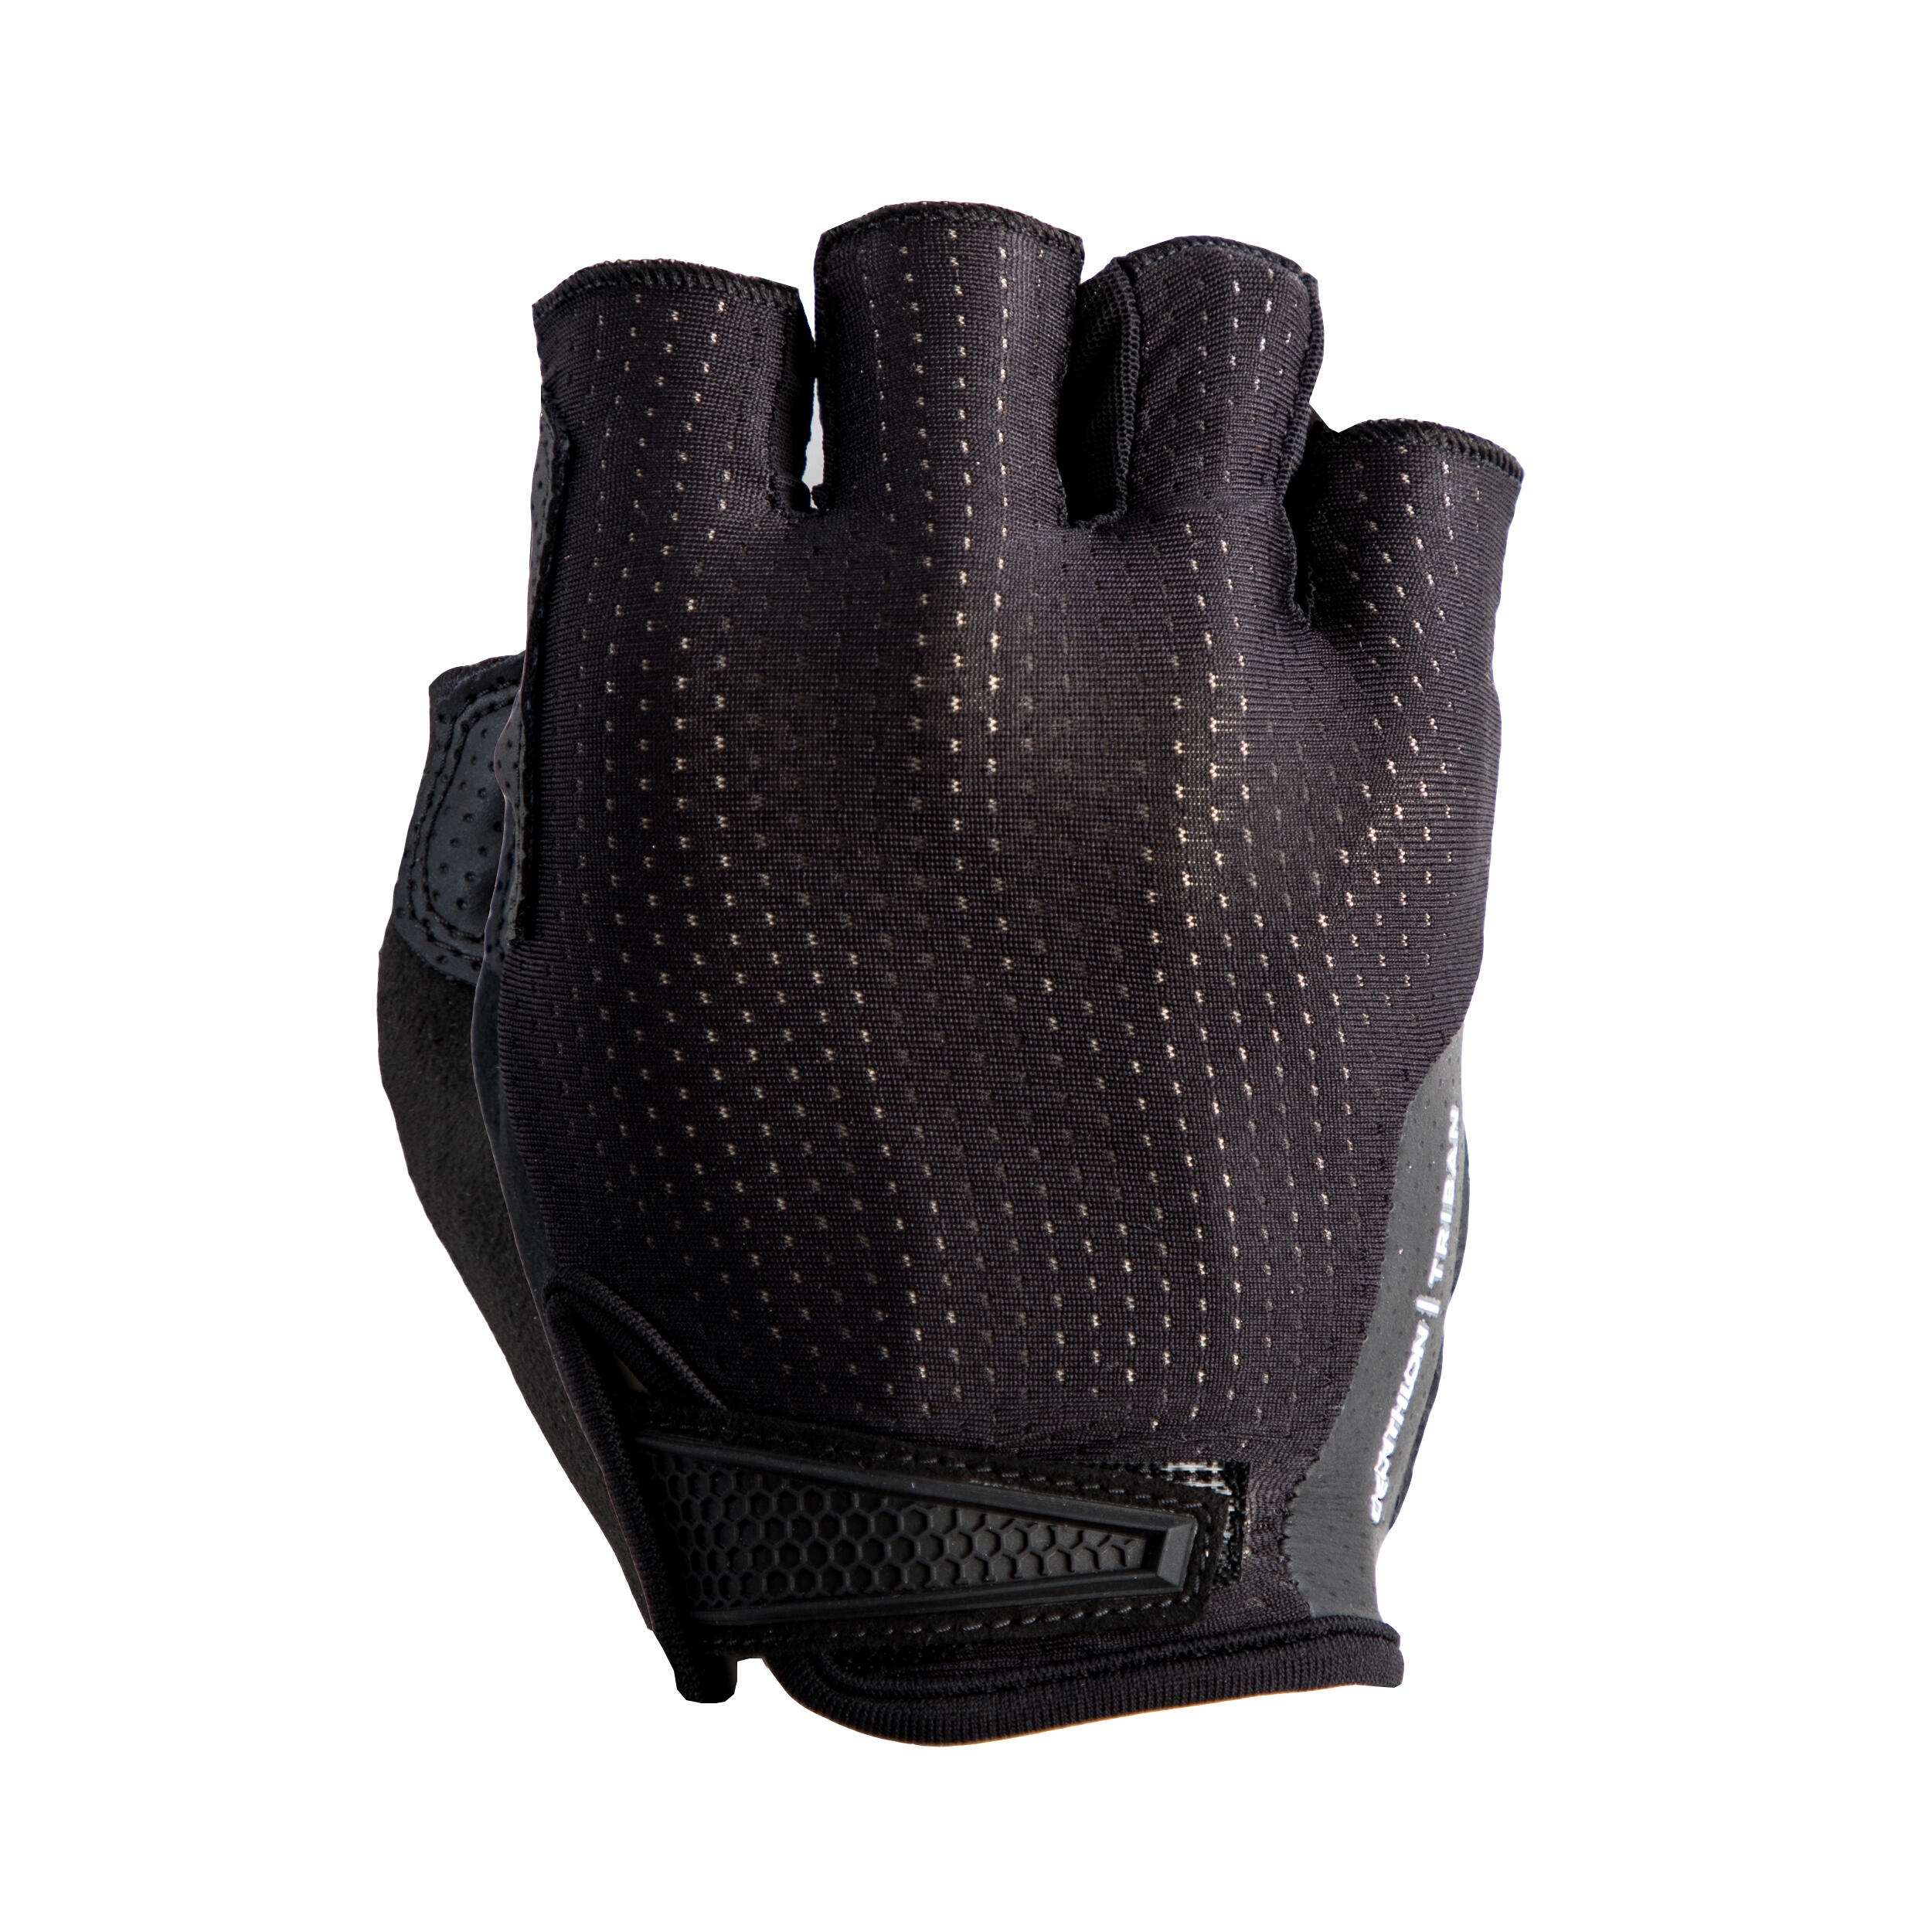 RoadCycling 900 Road Cycling Gloves - Black 11/11